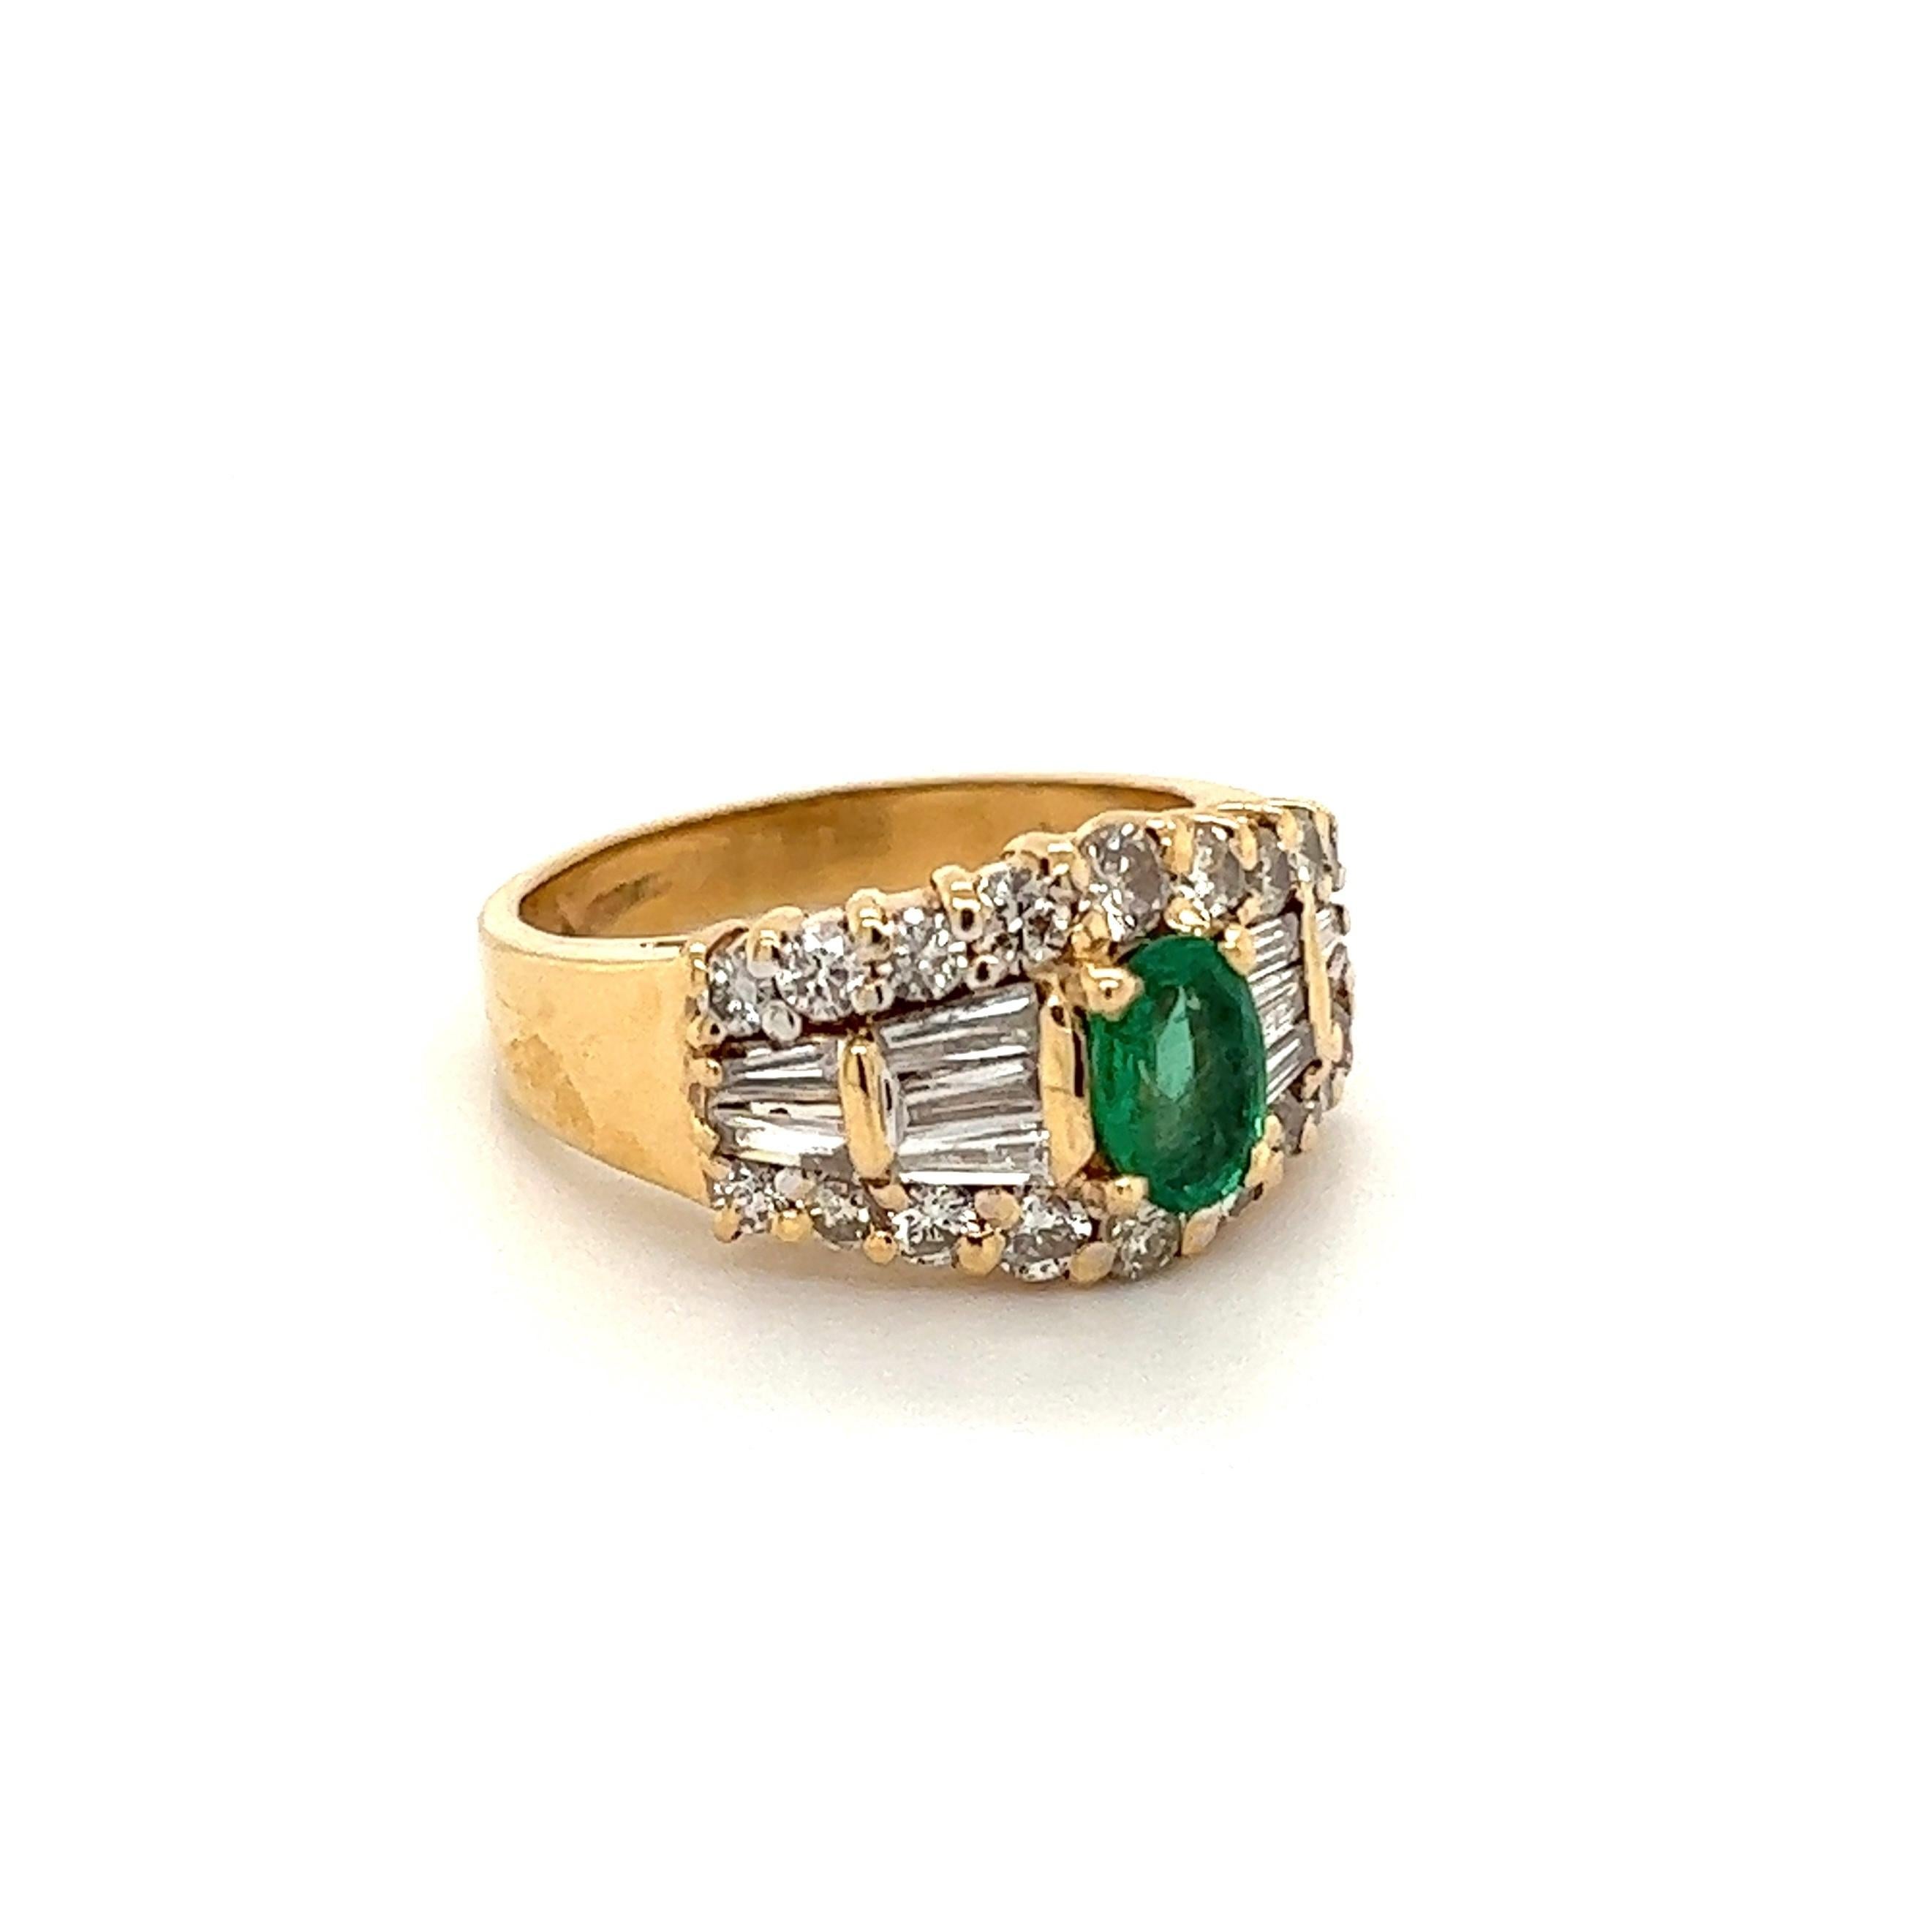 Beautiful and Stylish Emerald and Diamond Gold Band Ring. Securely Hand set with an Oval Emerald, weighing approx. 0.50 Carats and Diamonds weighing approx. 1.00tcw. Hand crafted in 14K White Gold. Measuring approx. 0.92” w x 0.73” w x 0.40” h. Ring